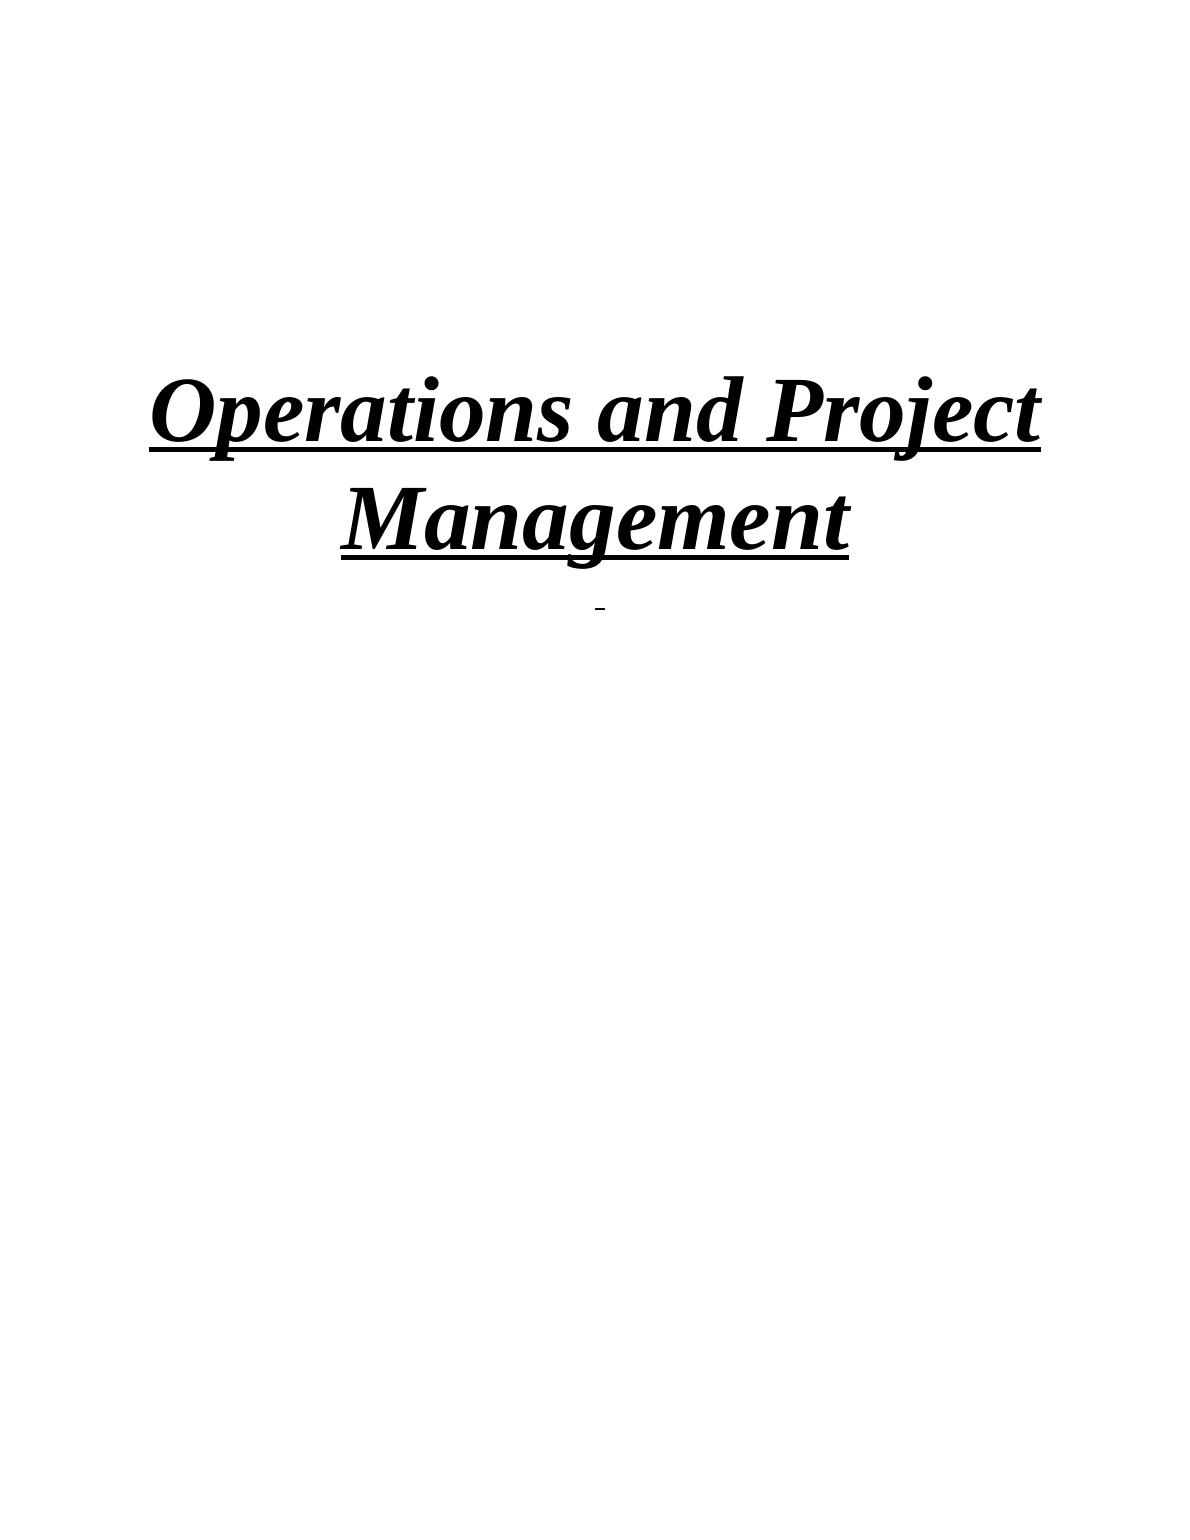 Implementation of Operations Management Principles in Organisational Context_1